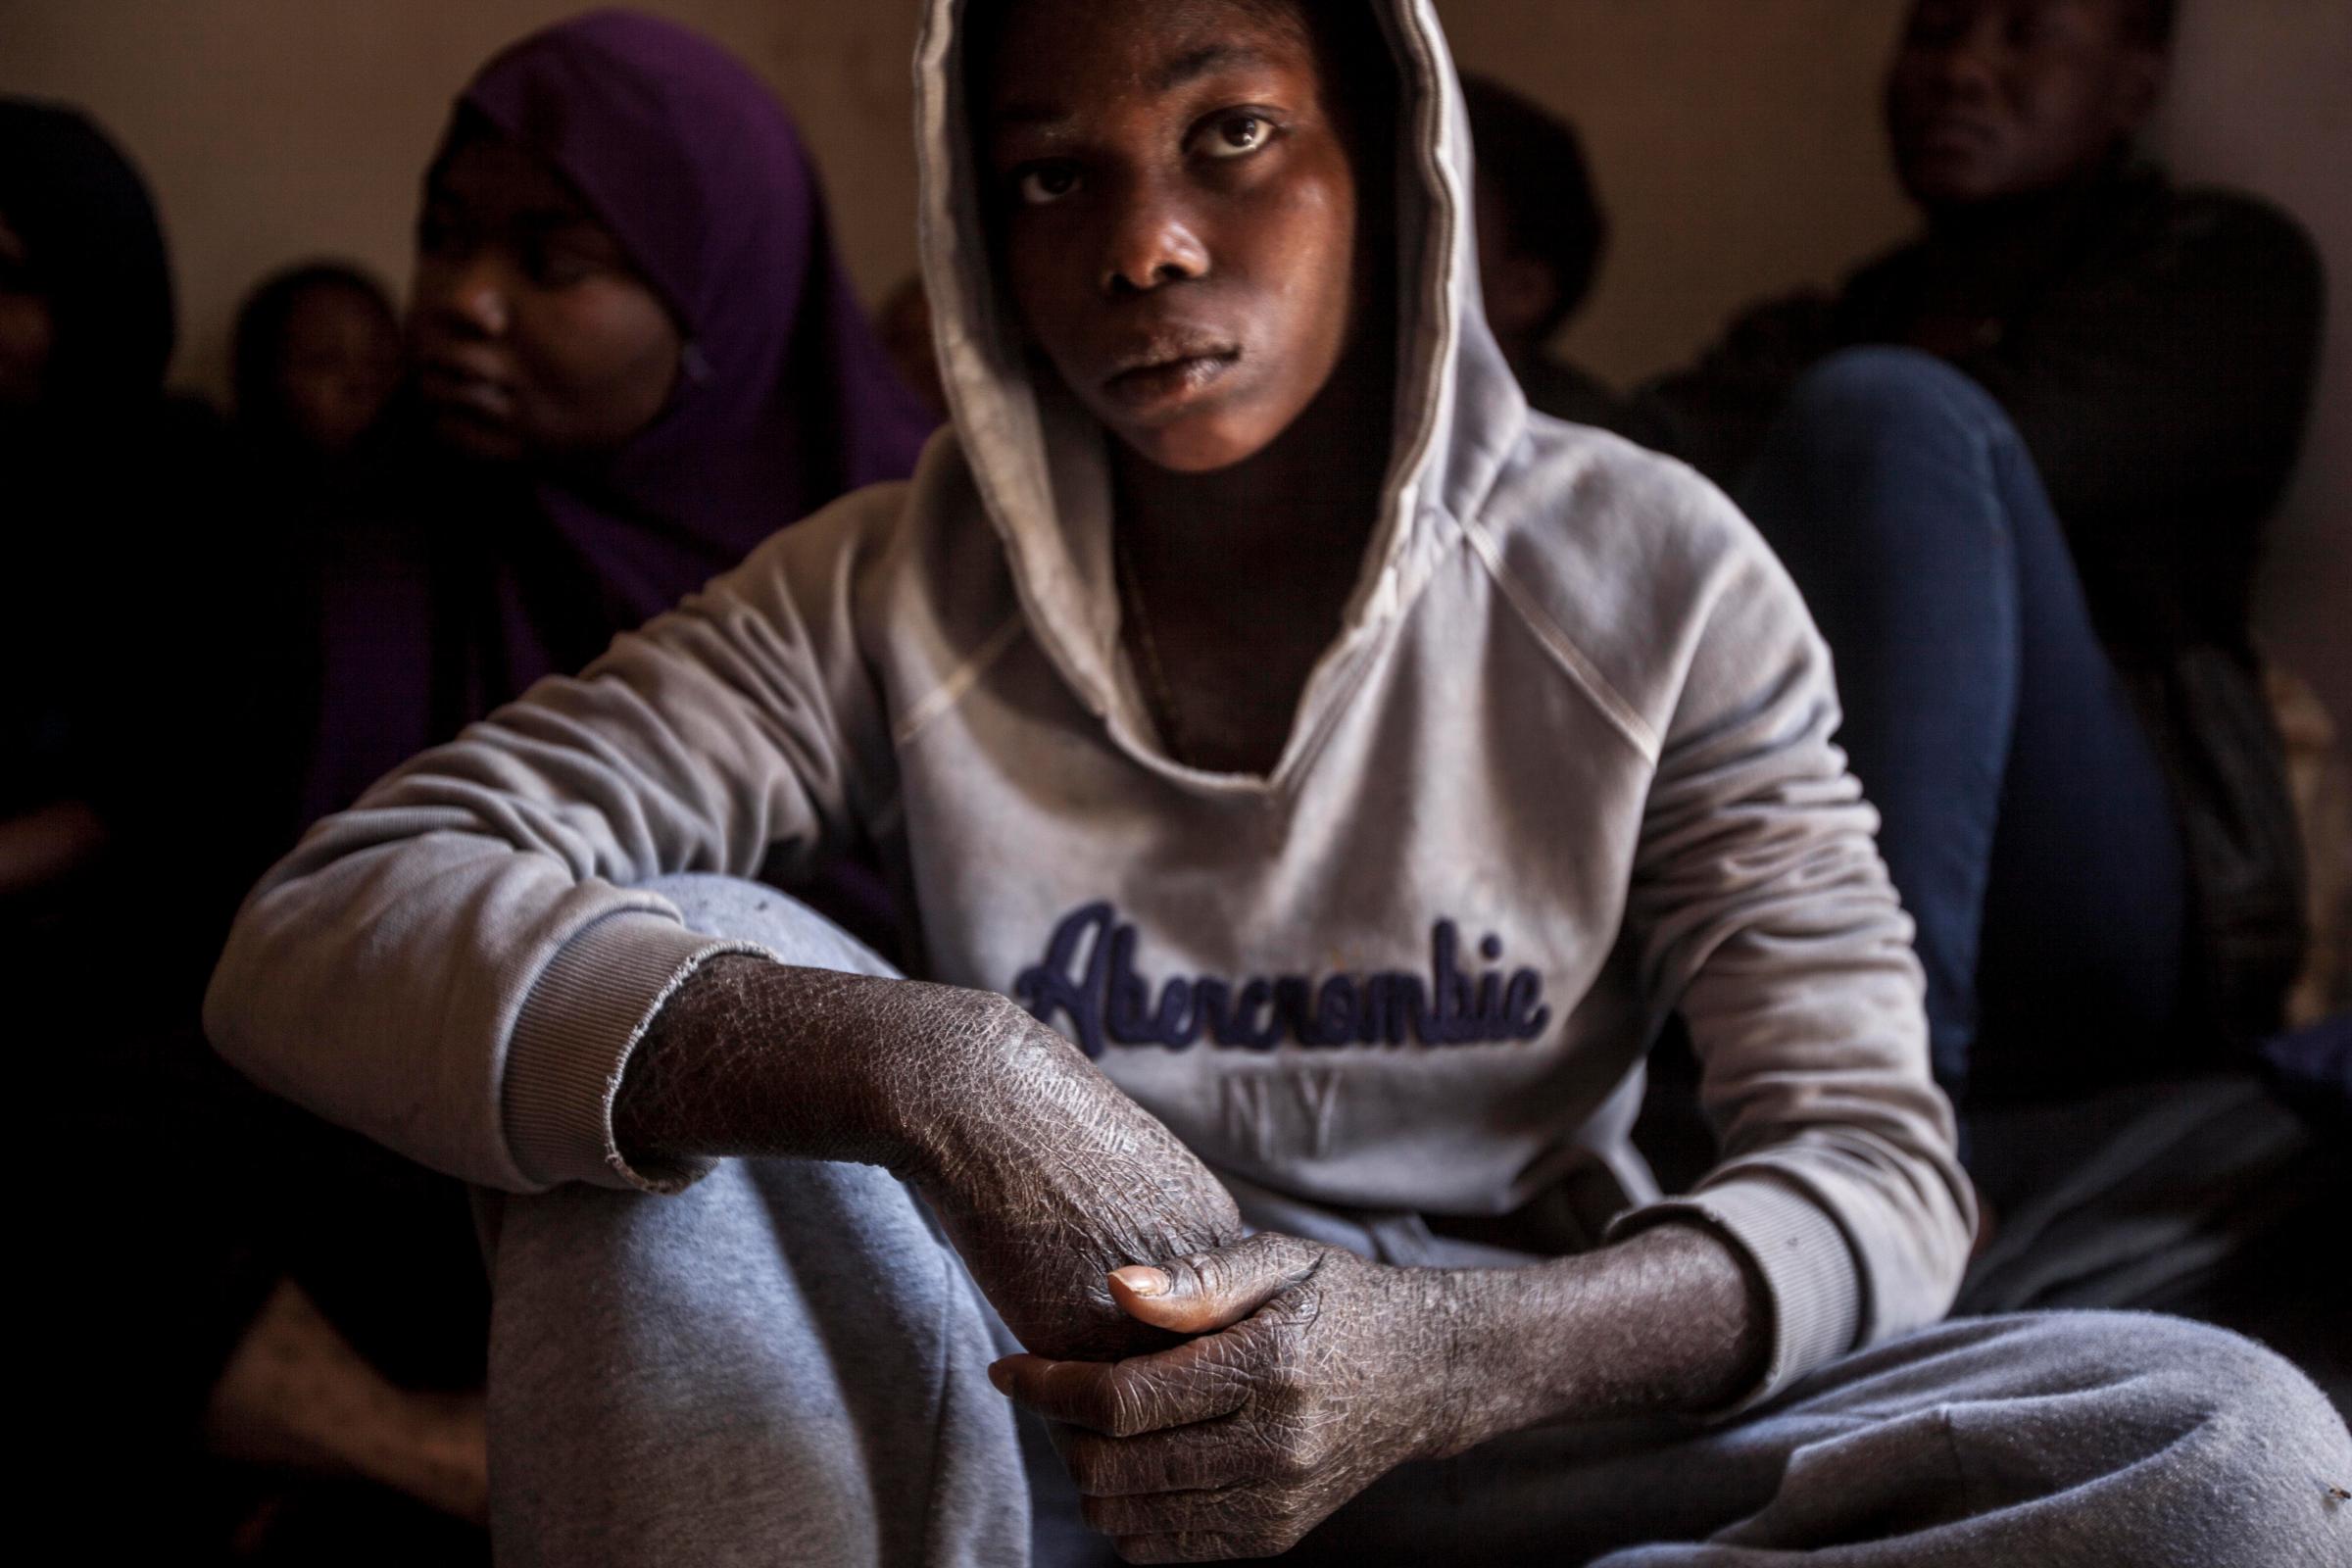 A young woman migrant suffering from scabies sits in the female section of a detention center in Surman, Libya.